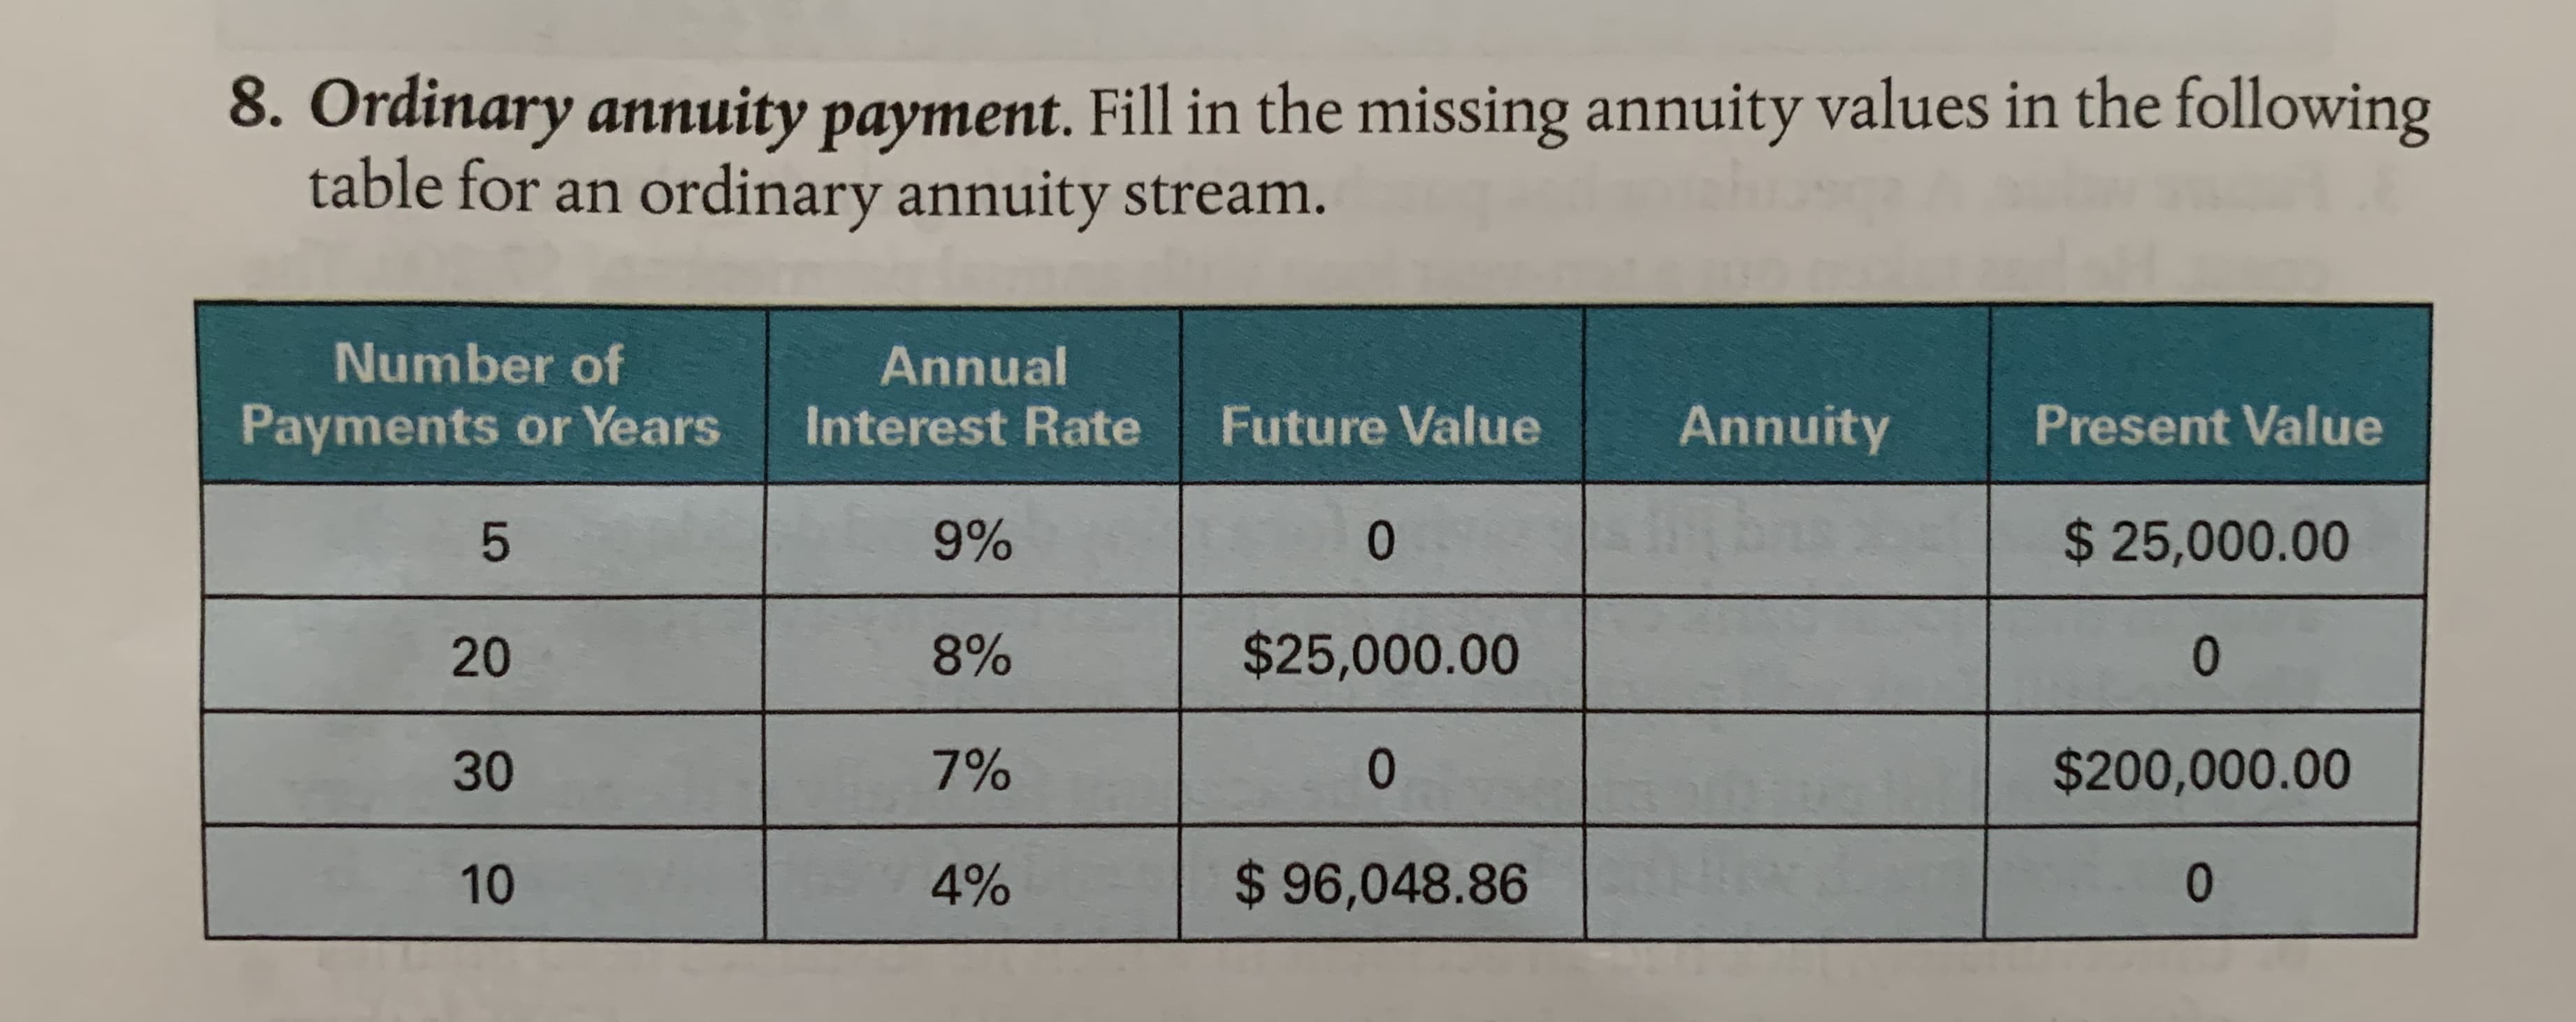 8. Ordinary annuity payment. Fill in the missing annuity values in the following
table for an ordinary annuity stream.
Number of
Annual
Payments or Years
Interest Rate
Future Value
Annuity
Present Value
9%
$ 25,000.00
20
8%
$25,000.00
30
7%
$200,000.00
10
4%
$ 96,048.86
0.
